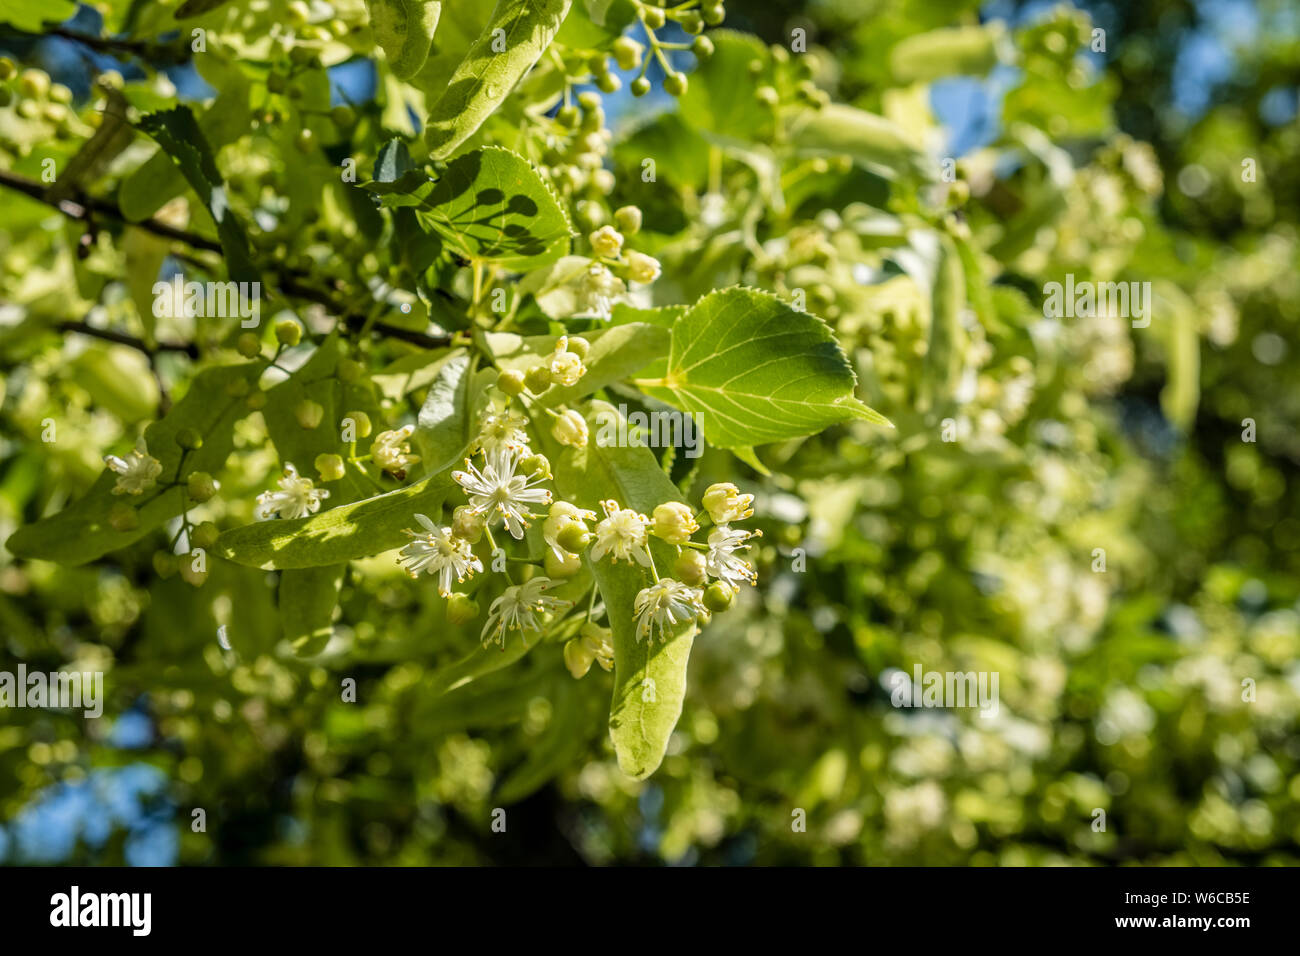 Blossoms of a Large-leaved Linden (Tilia platyphyllos) in full bloom Stock Photo